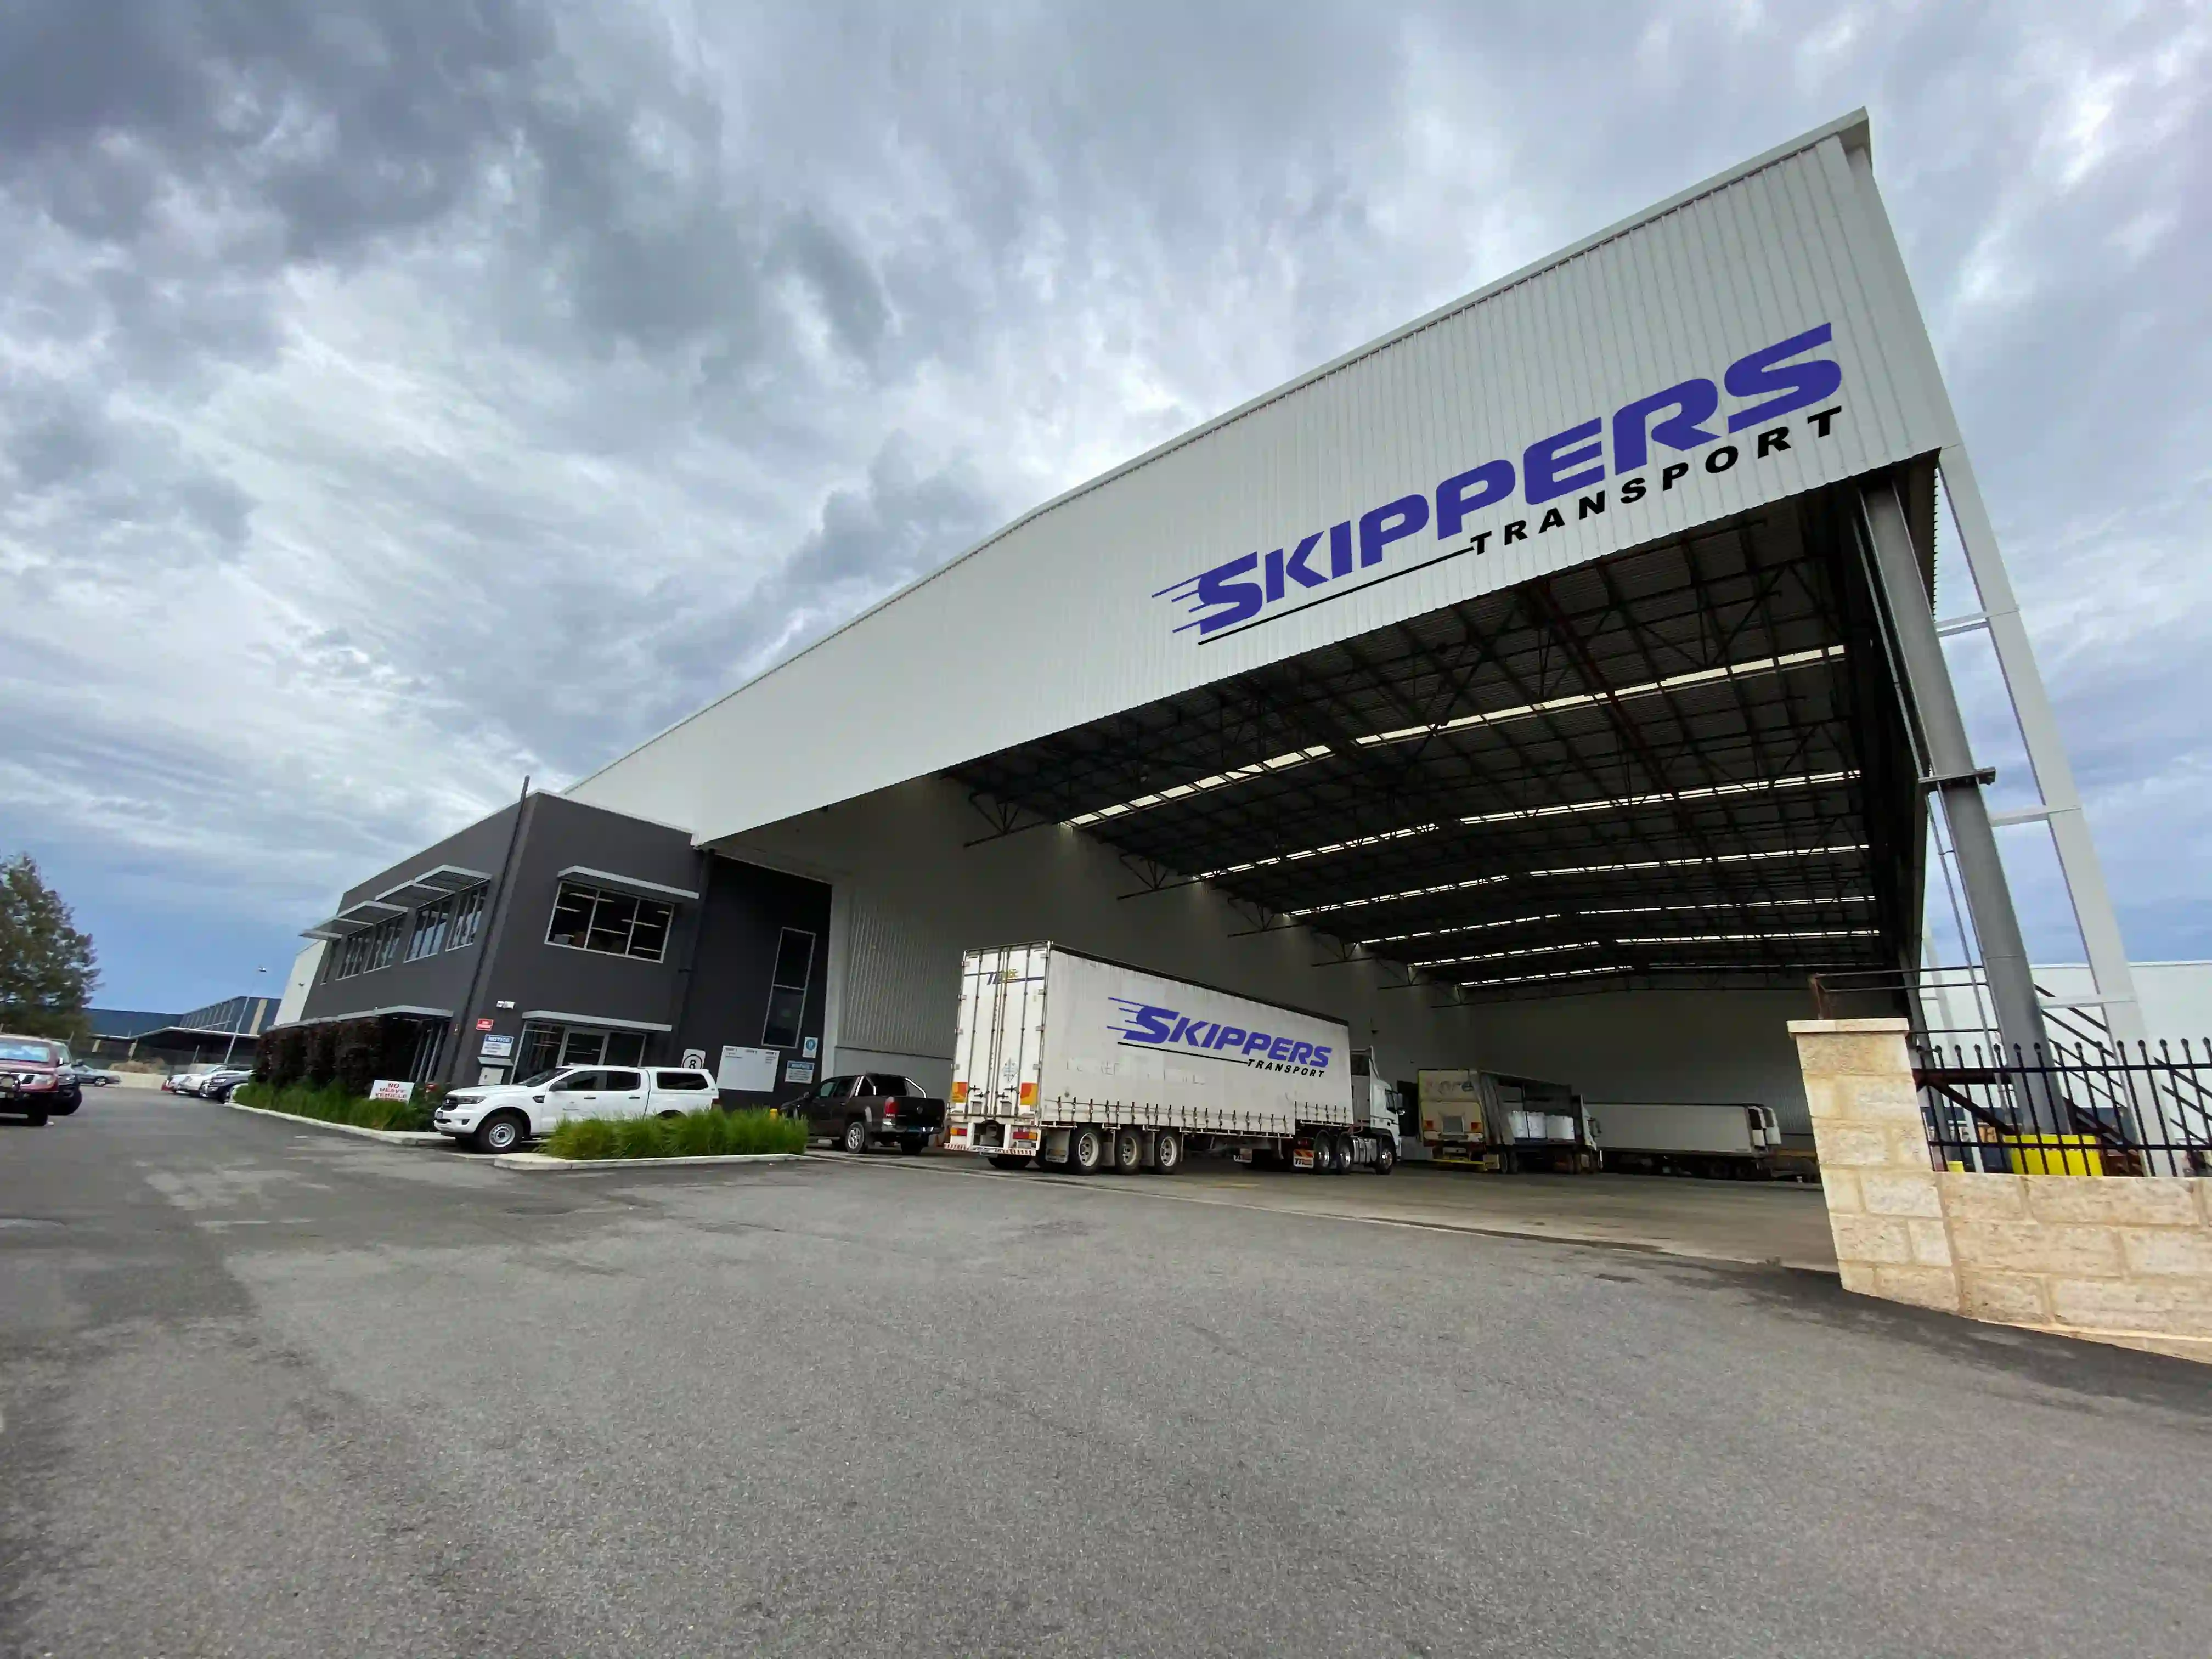 Skippers Transport warehouse facility with trucks and vehicles in front, showcasing their logistics and 3PL services in Perth, Western Australia